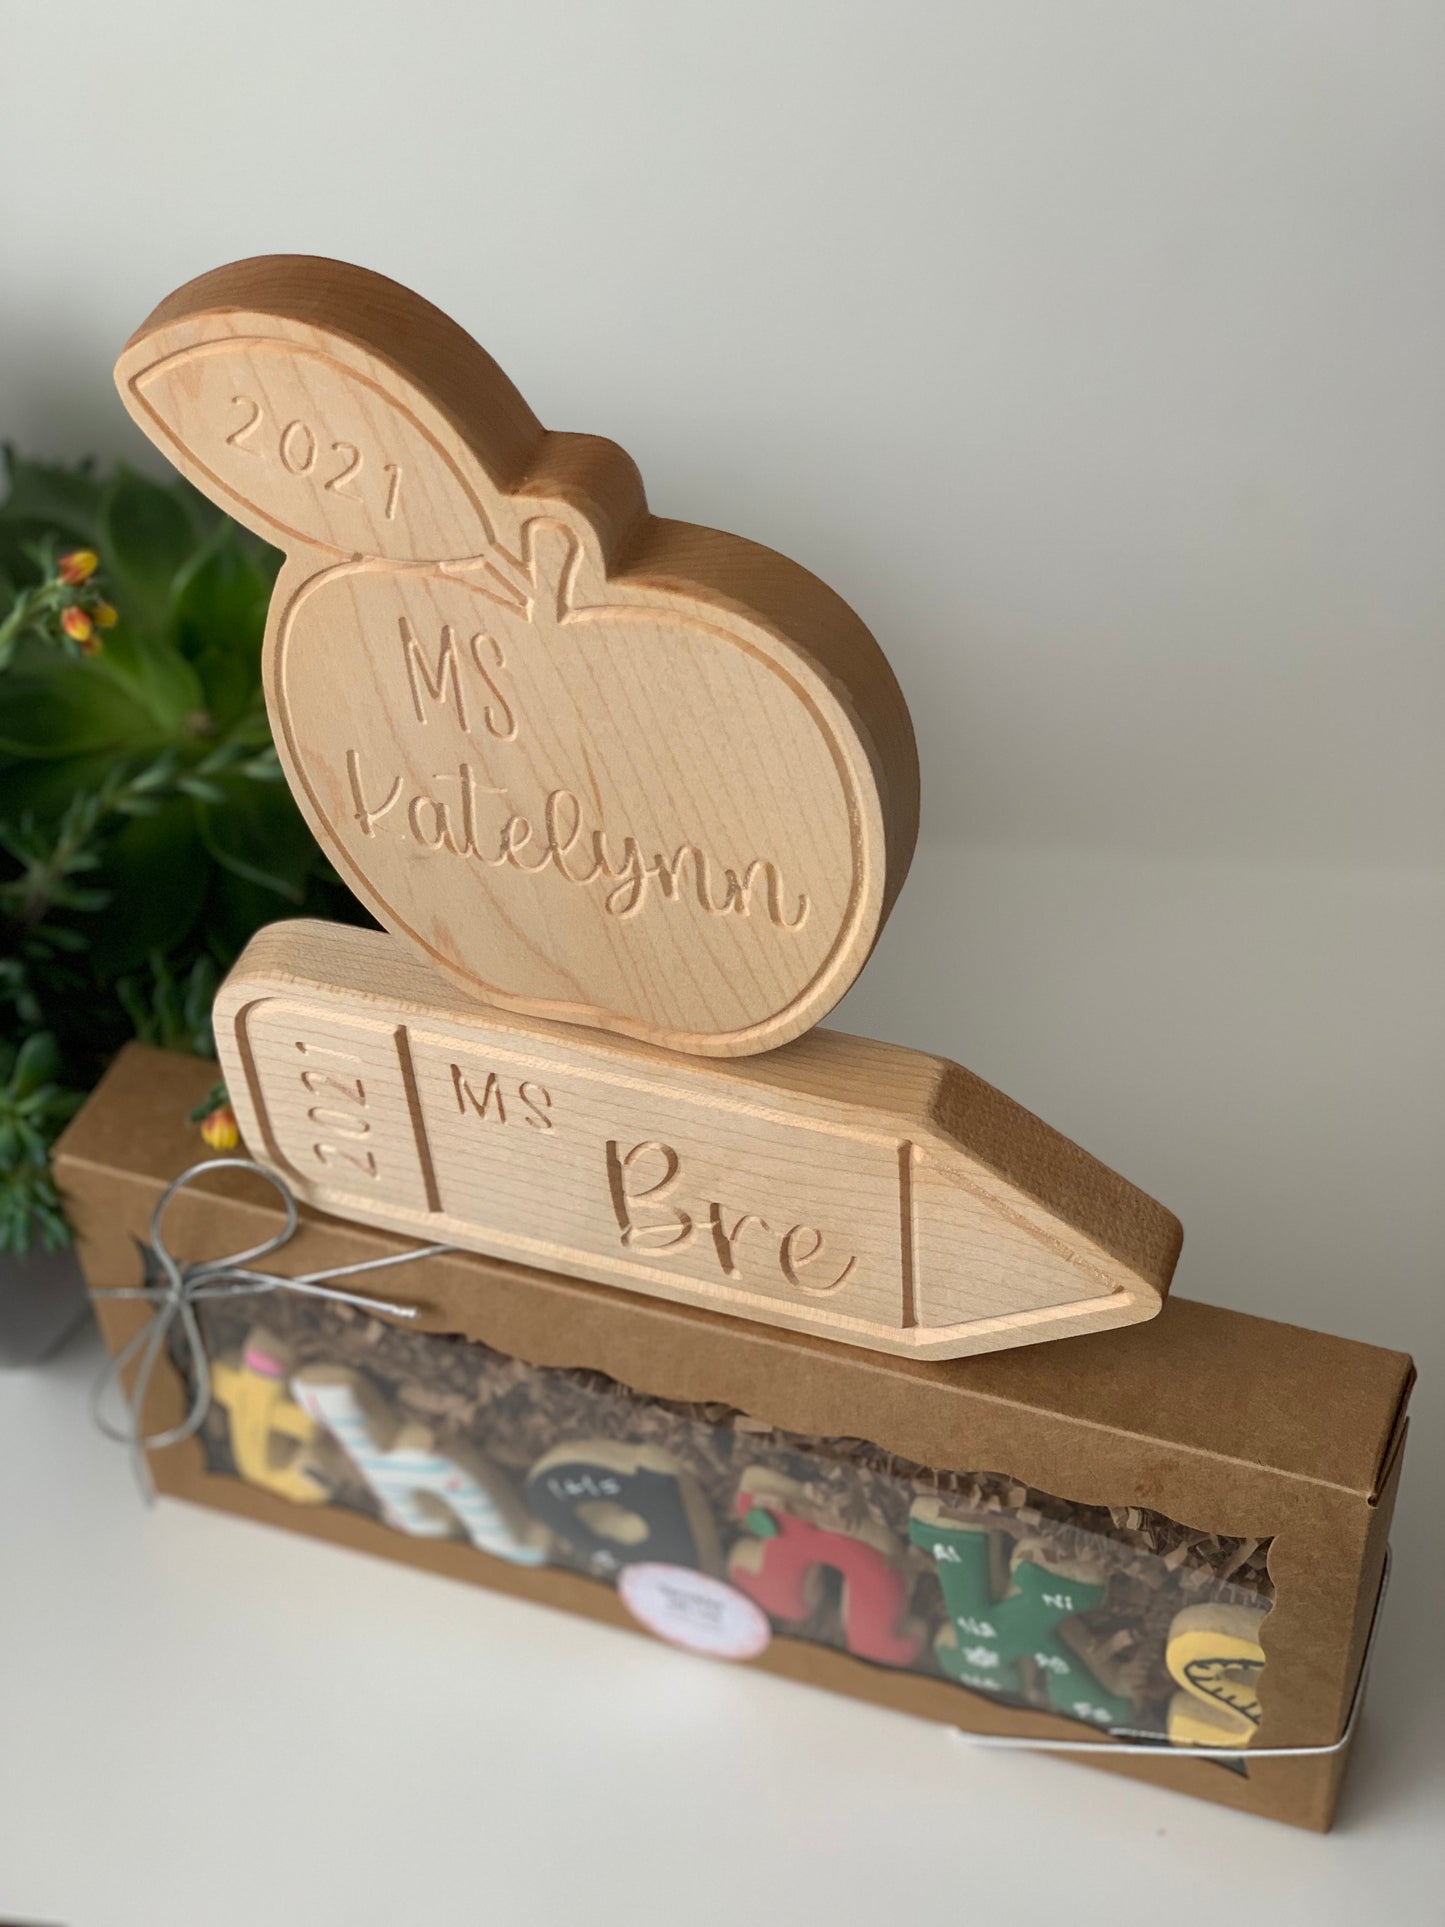 Personalized Teacher Gift - Name Plate for Desk, Wall, Door or Shelf